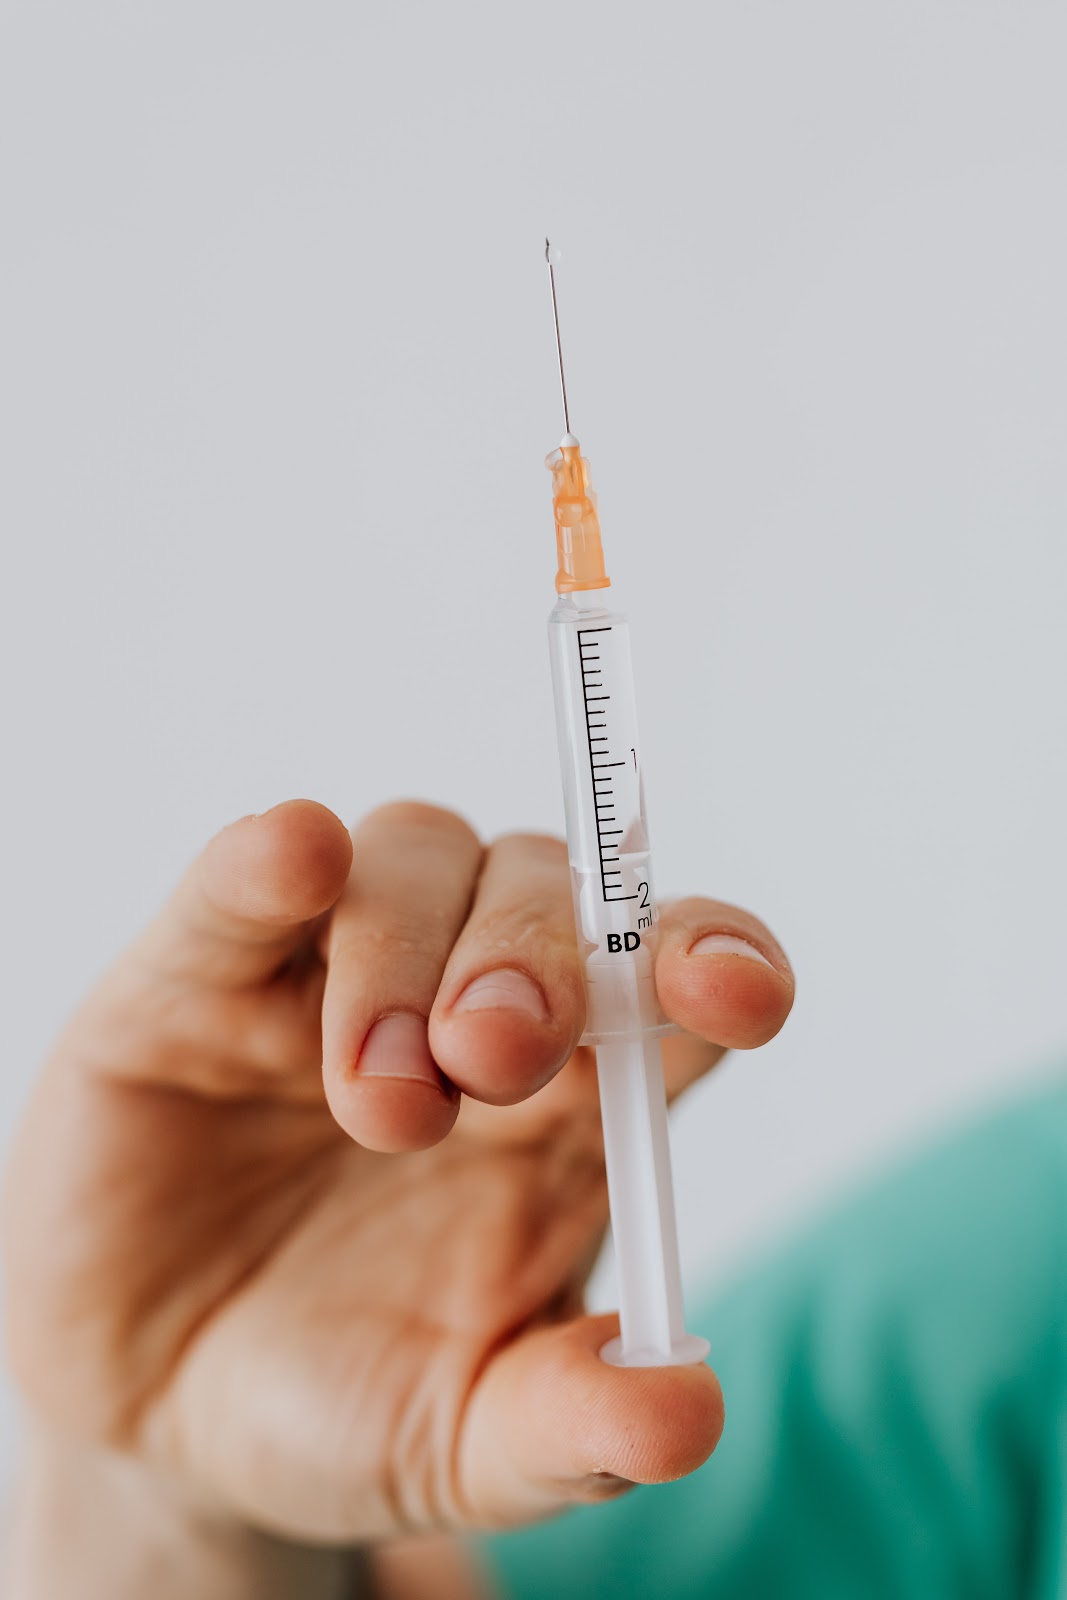 A close-up view of a person holding a vaccine.